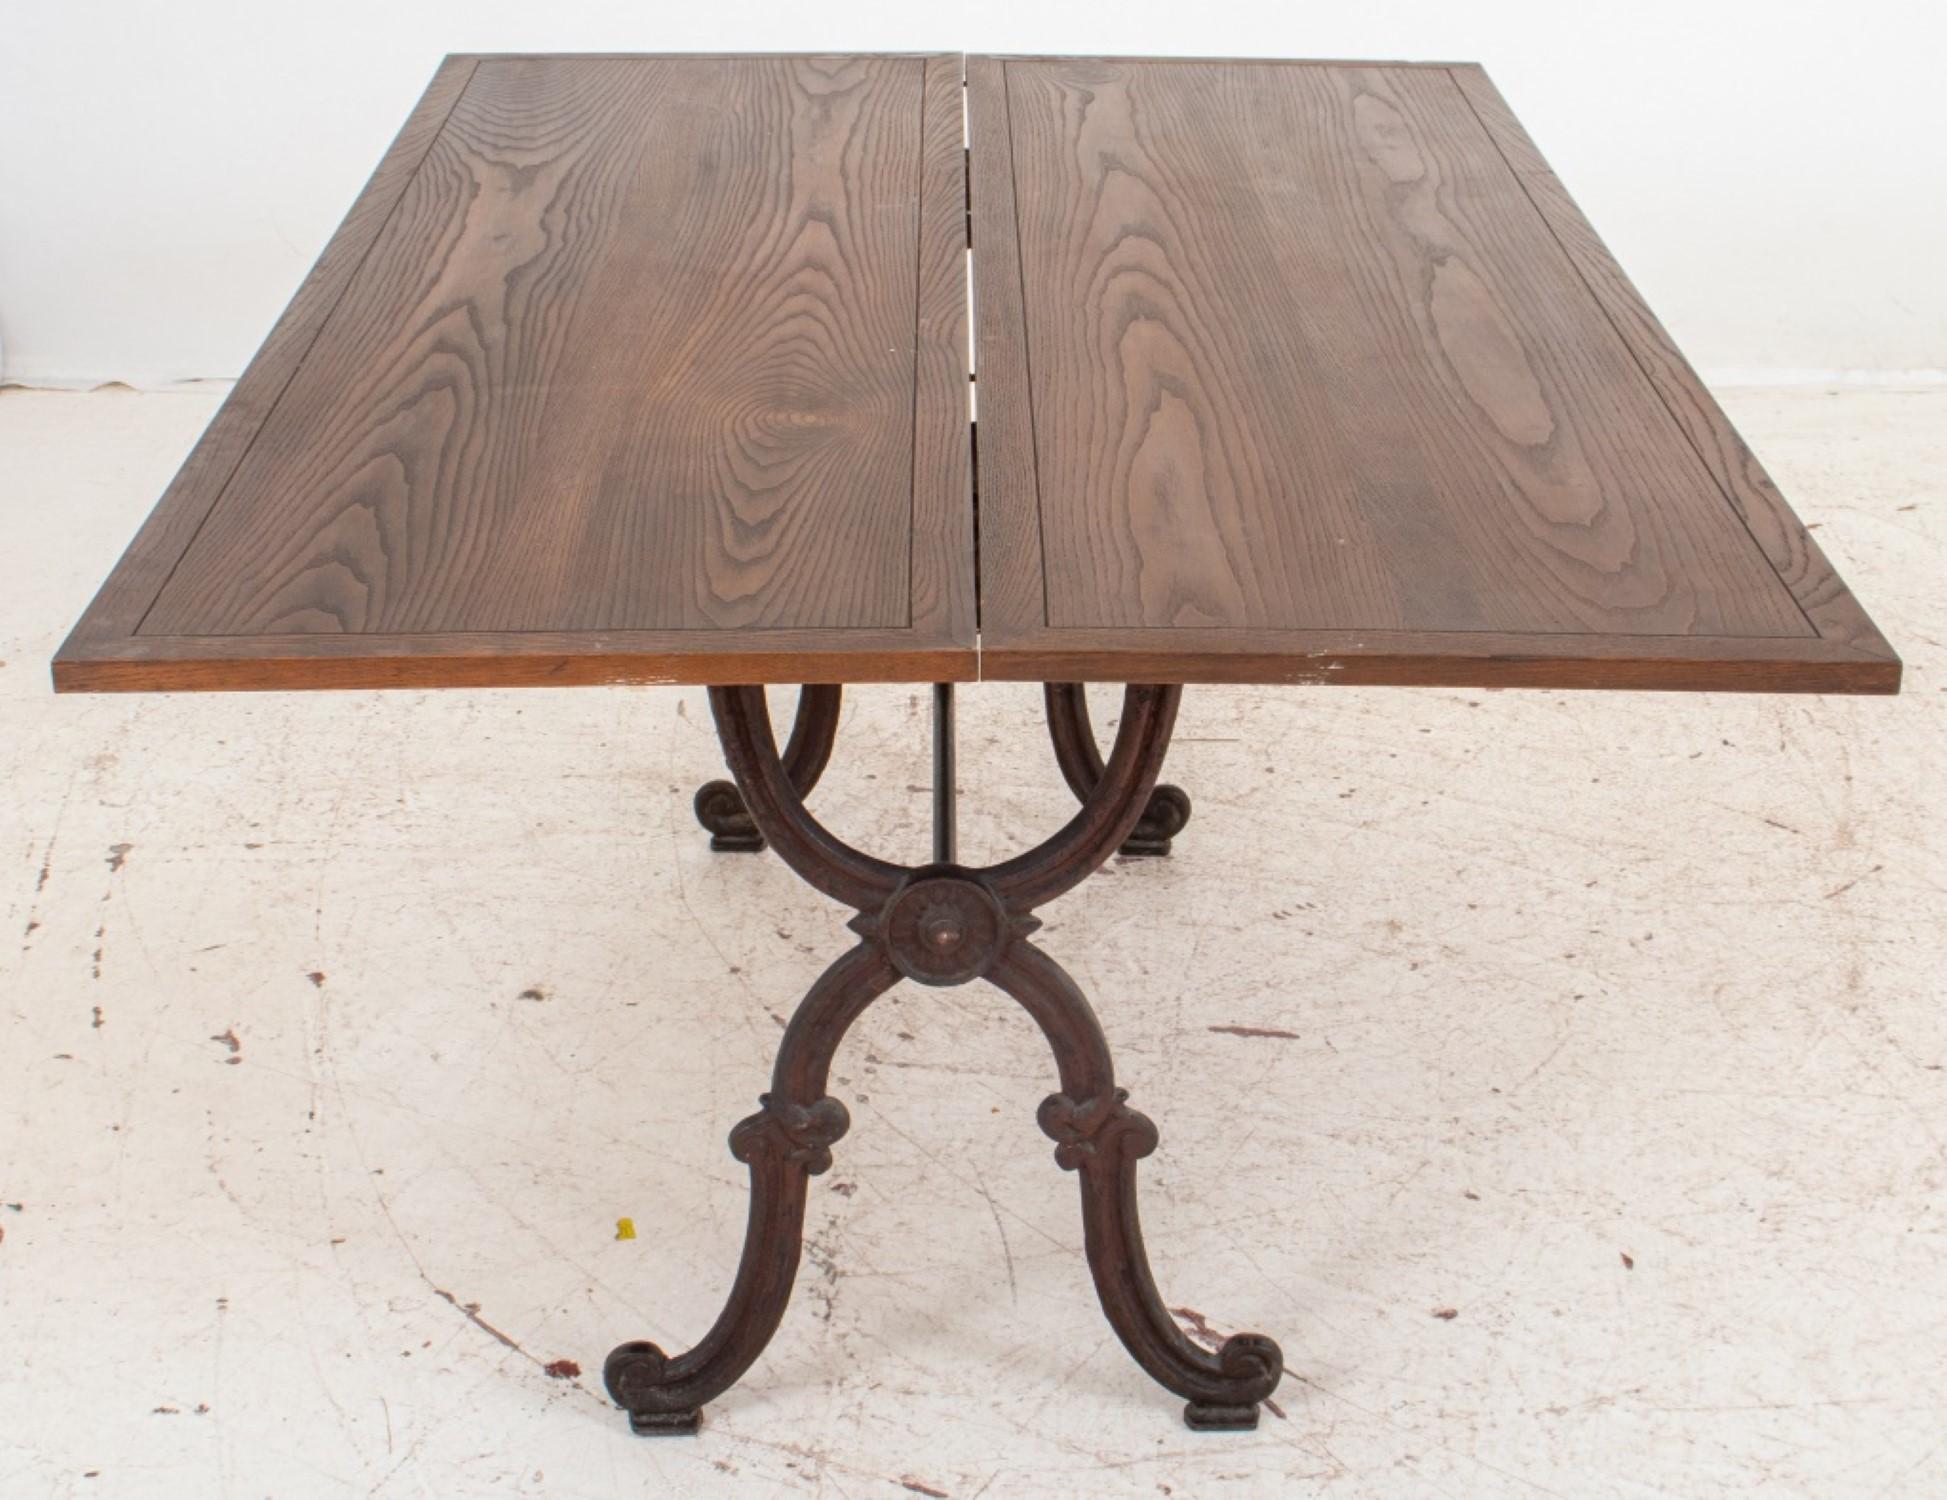 The dimensions for the vintage bistro-style dining table are as follows:

Open:

Height: 28